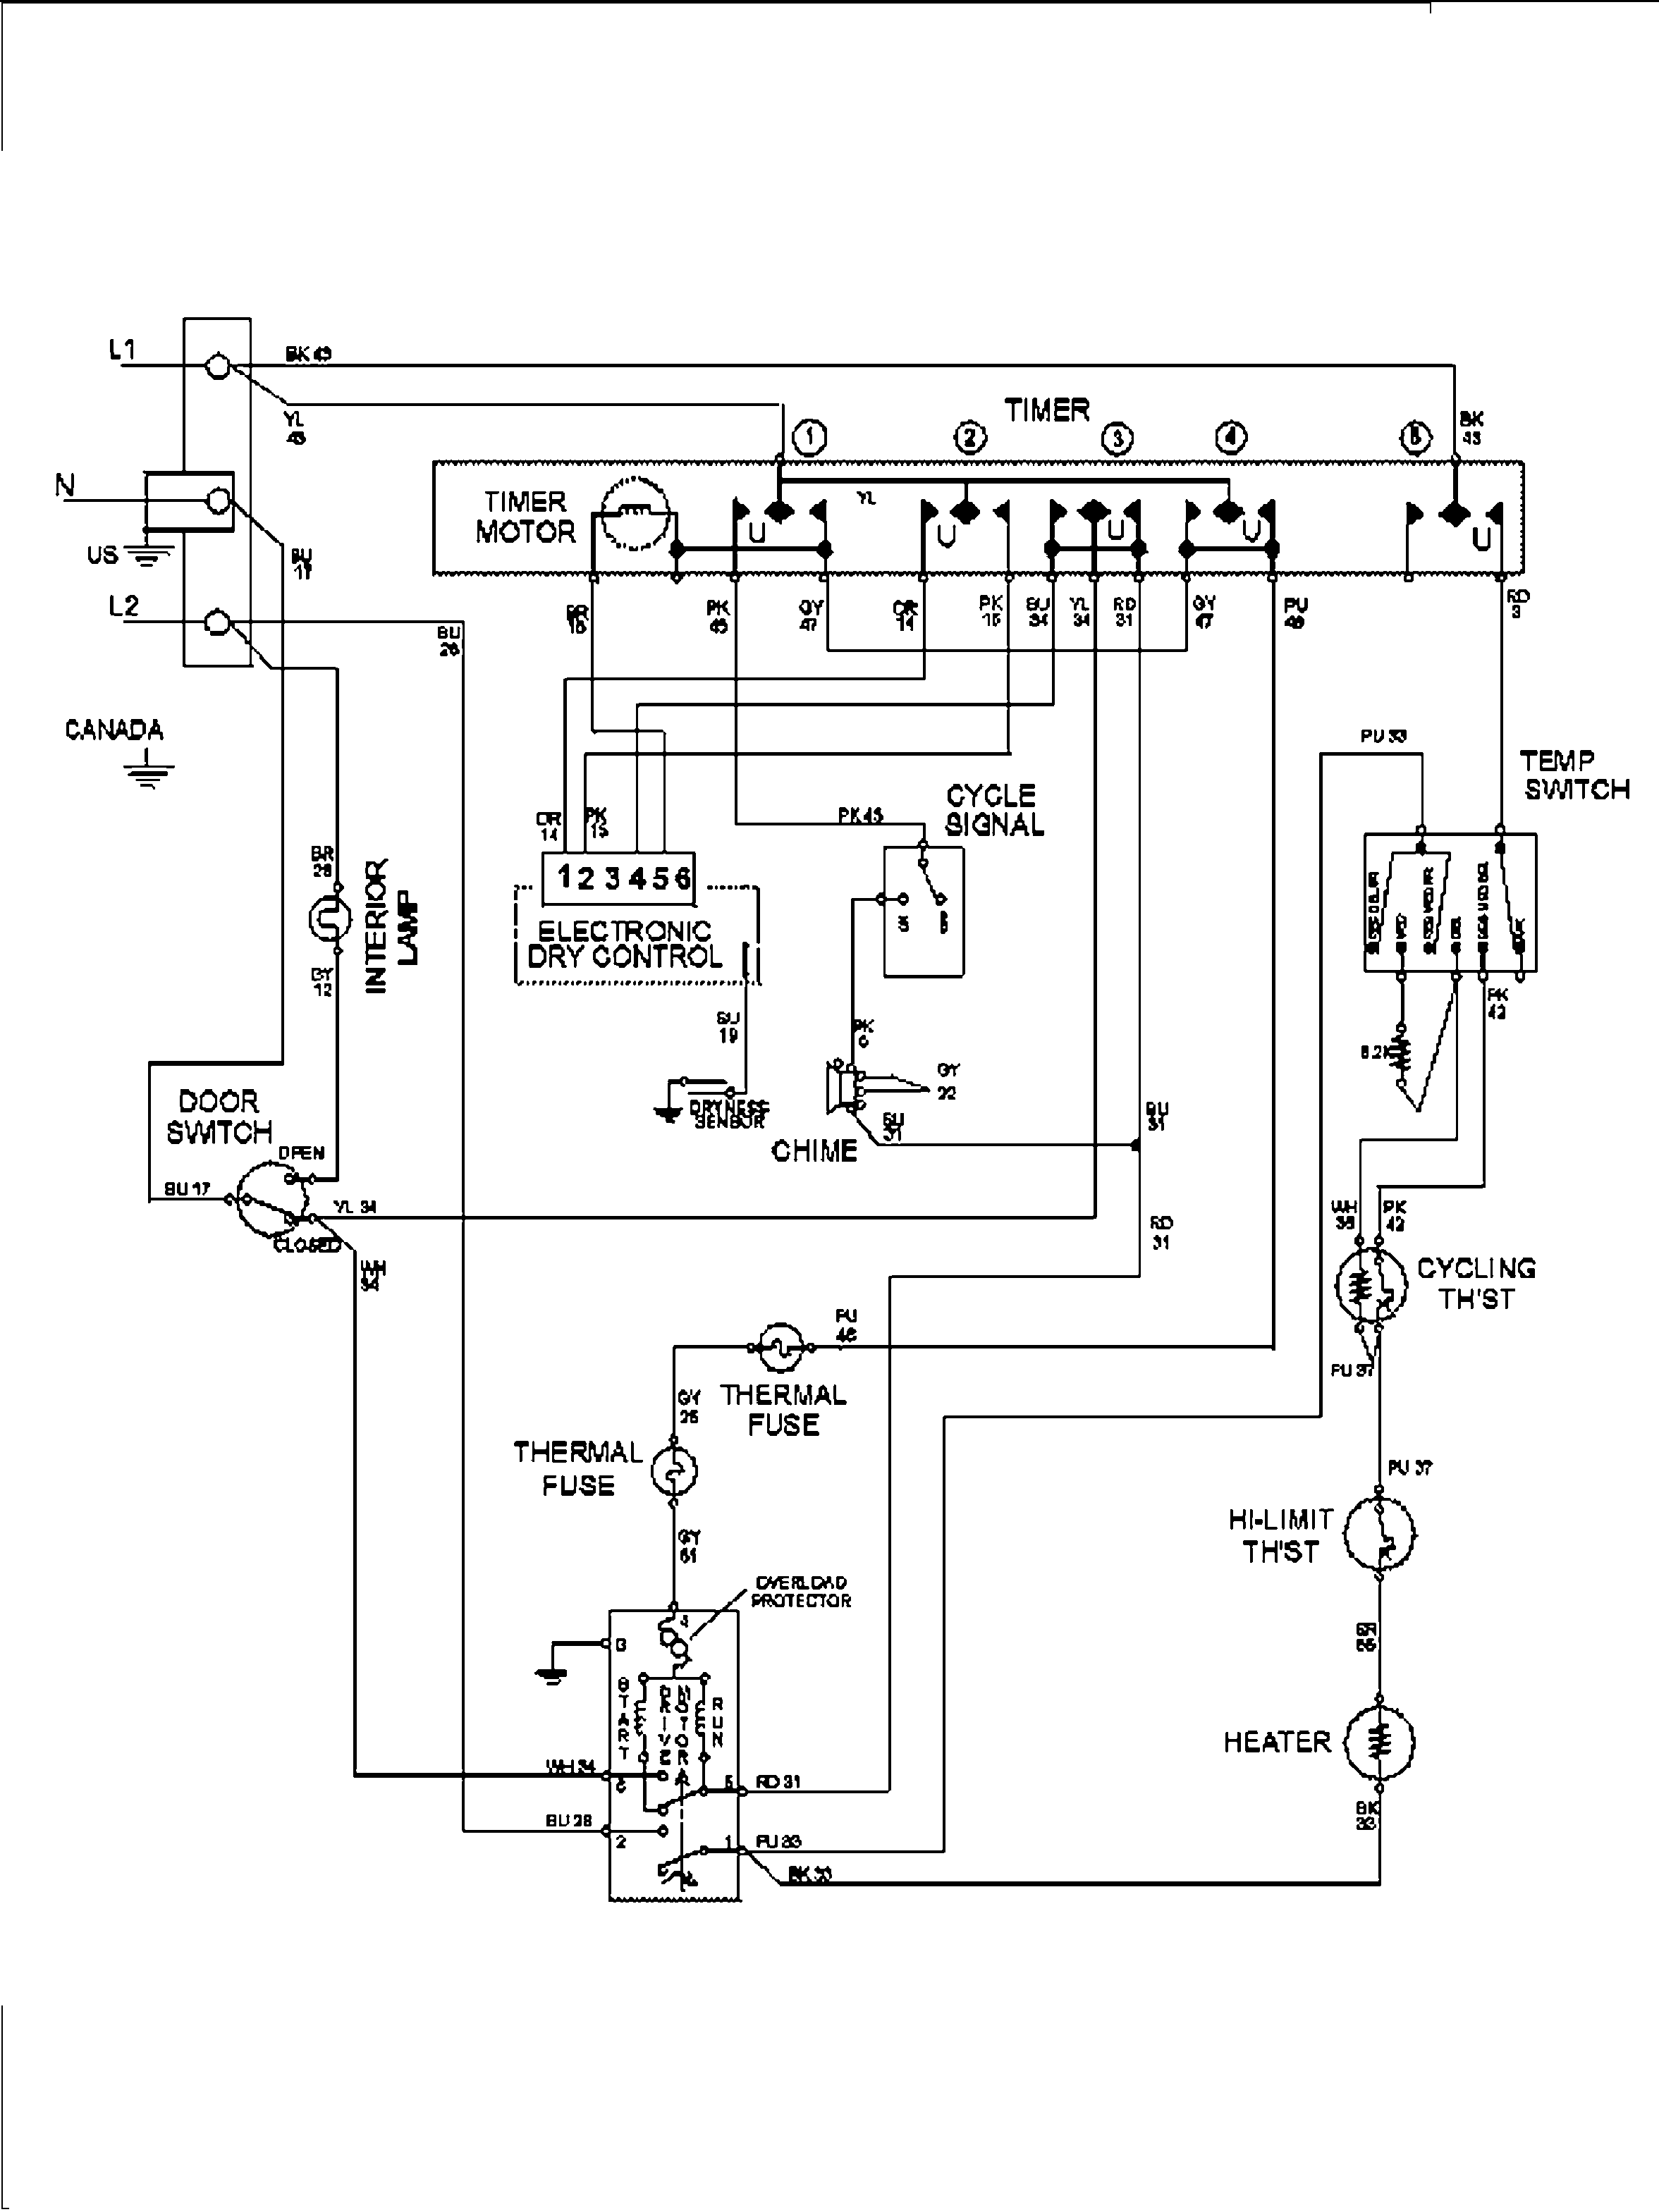 Maytag Wiring Diagram from c.searspartsdirect.com